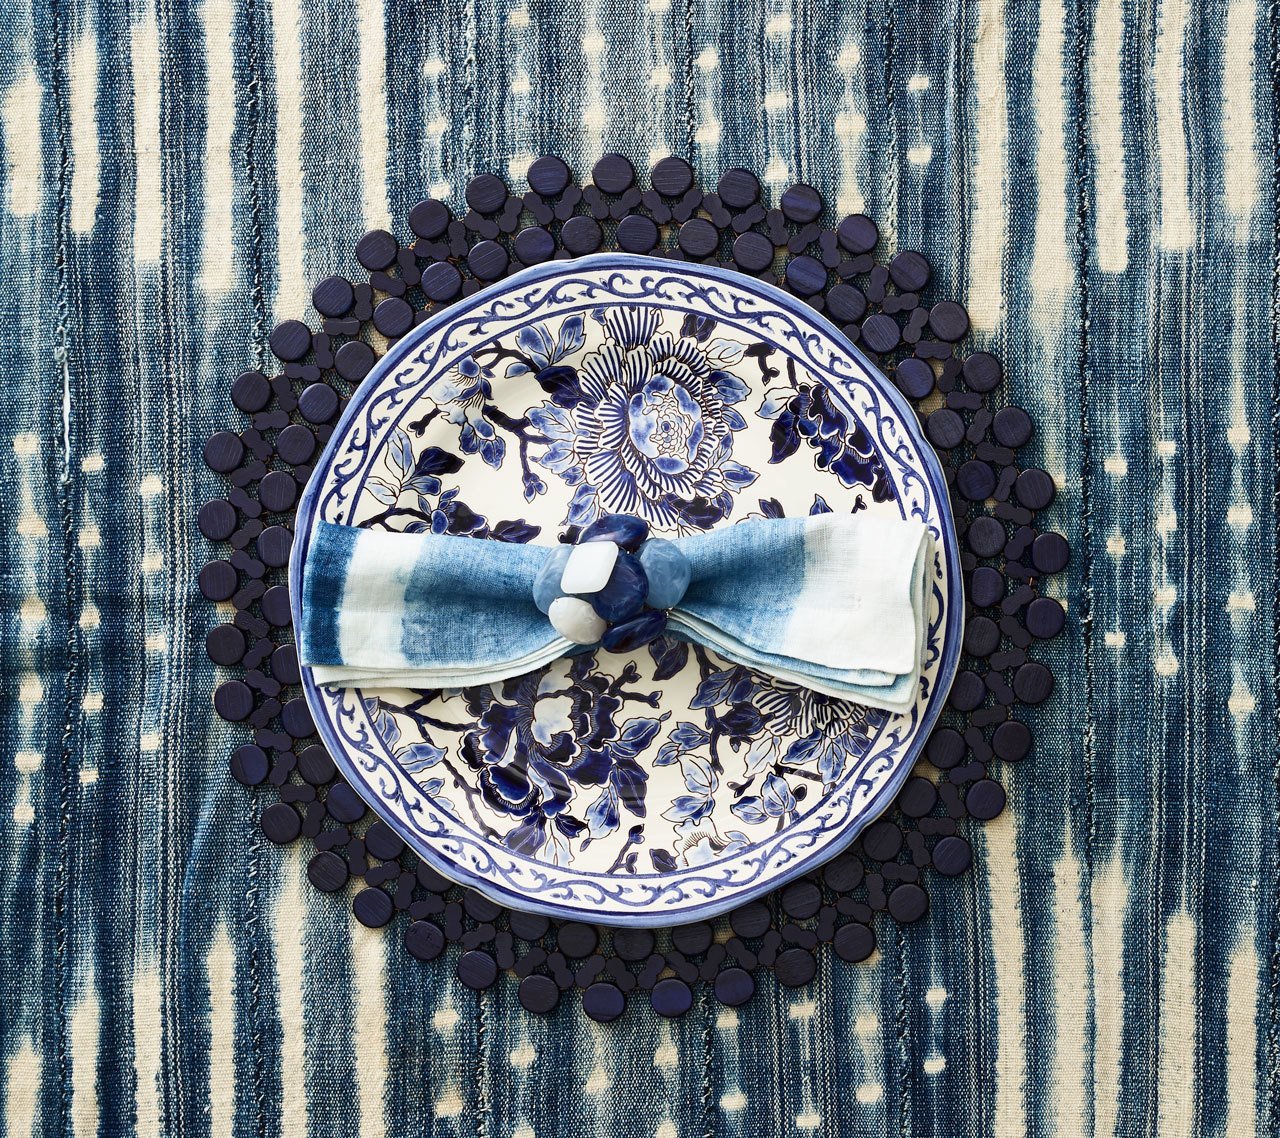 Round Bamboo Placemat in navy blue underneath a patterned plate and linen napkin of similar colors